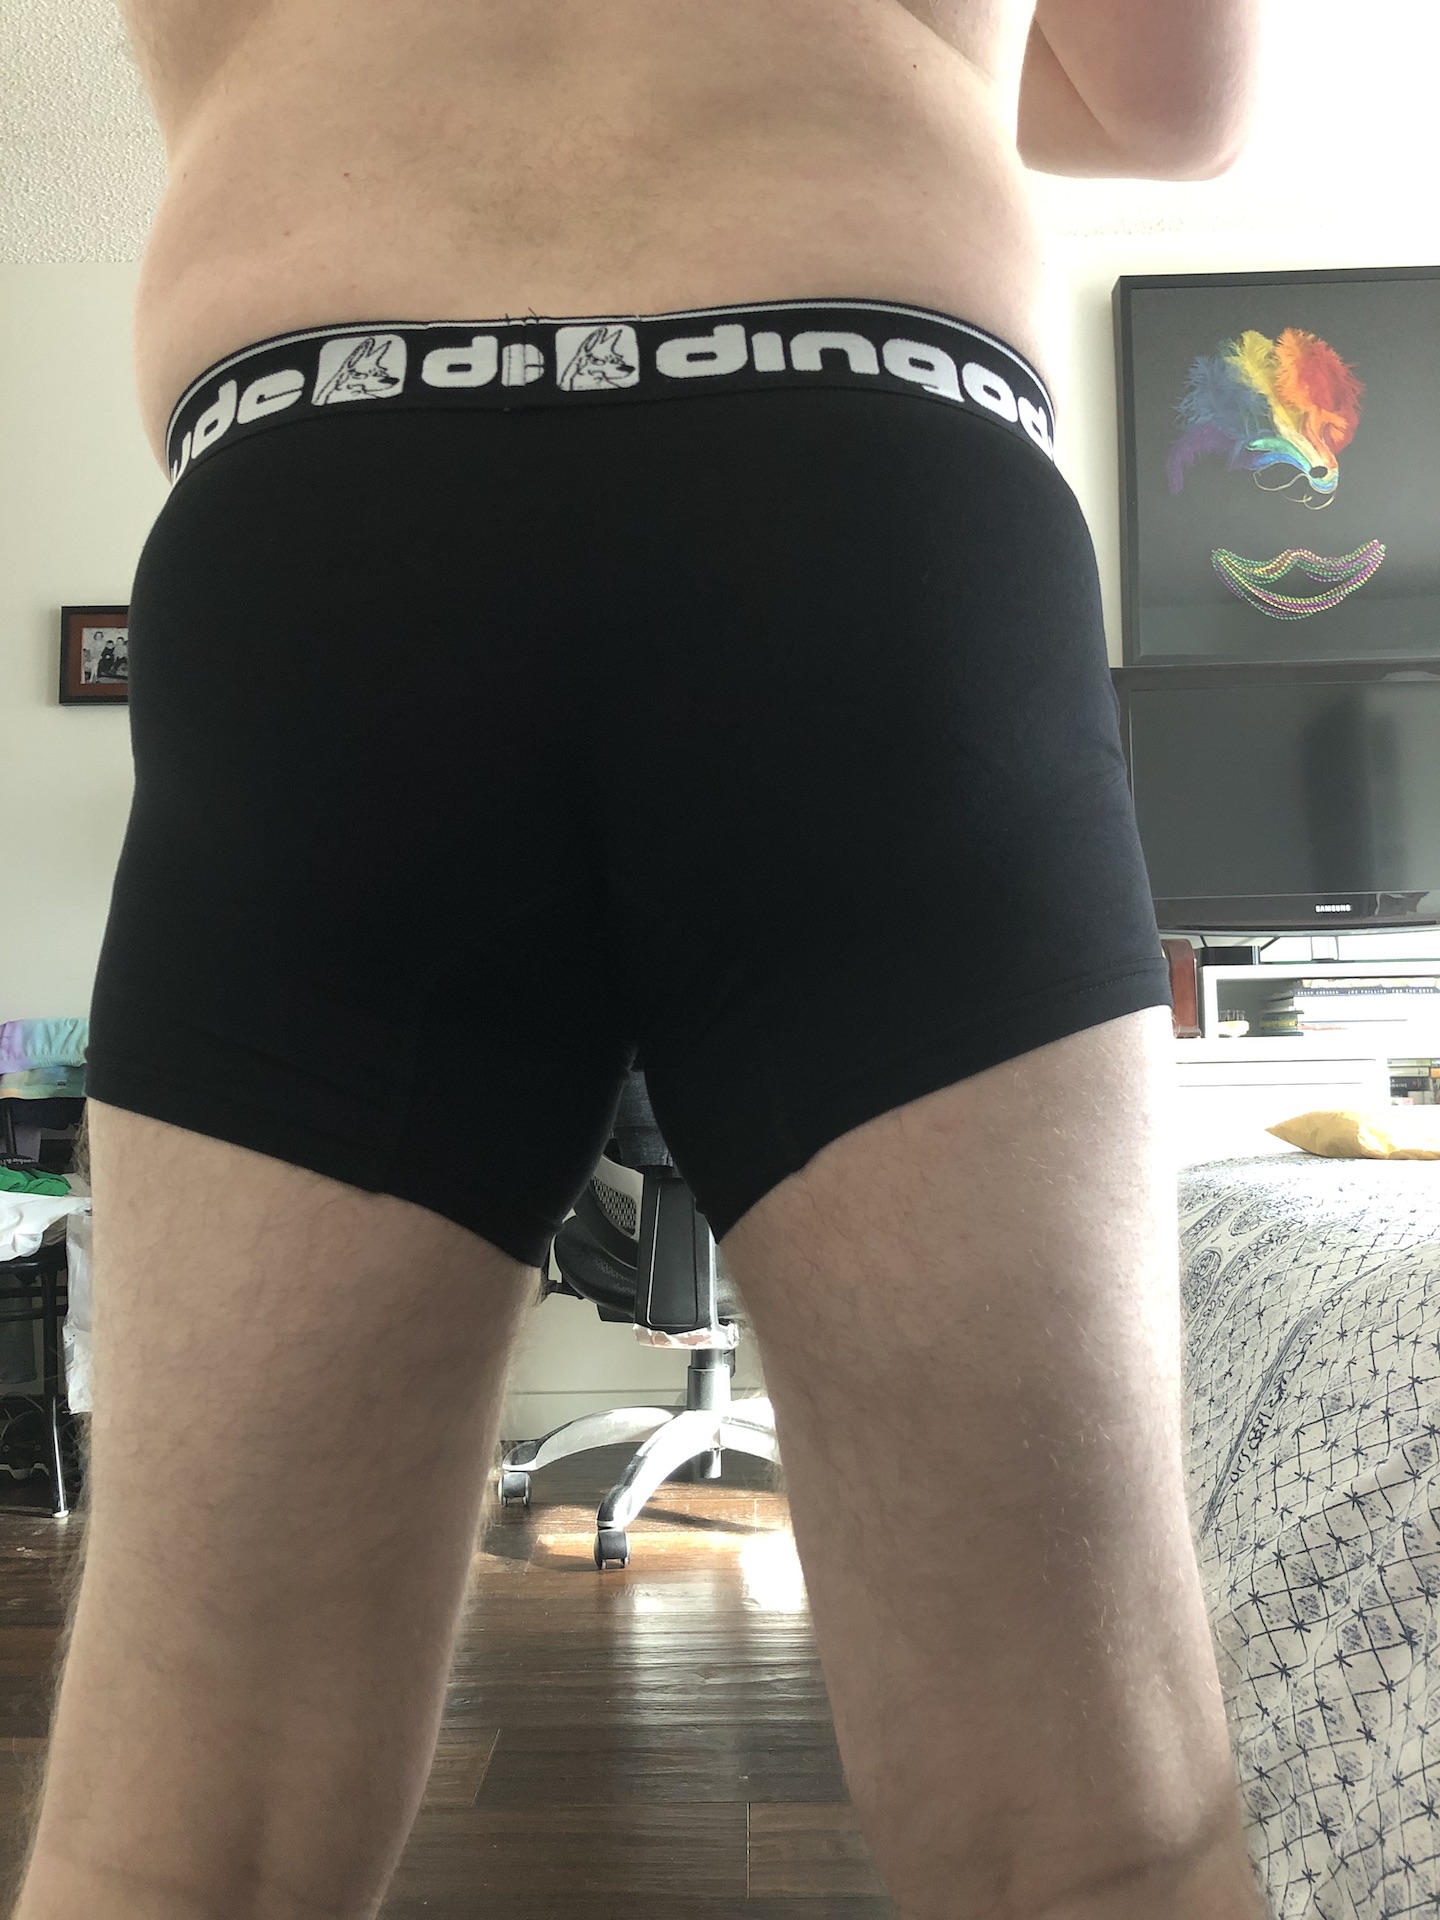 Dingodude Black Boxers for REVIEW today by Undiesboy